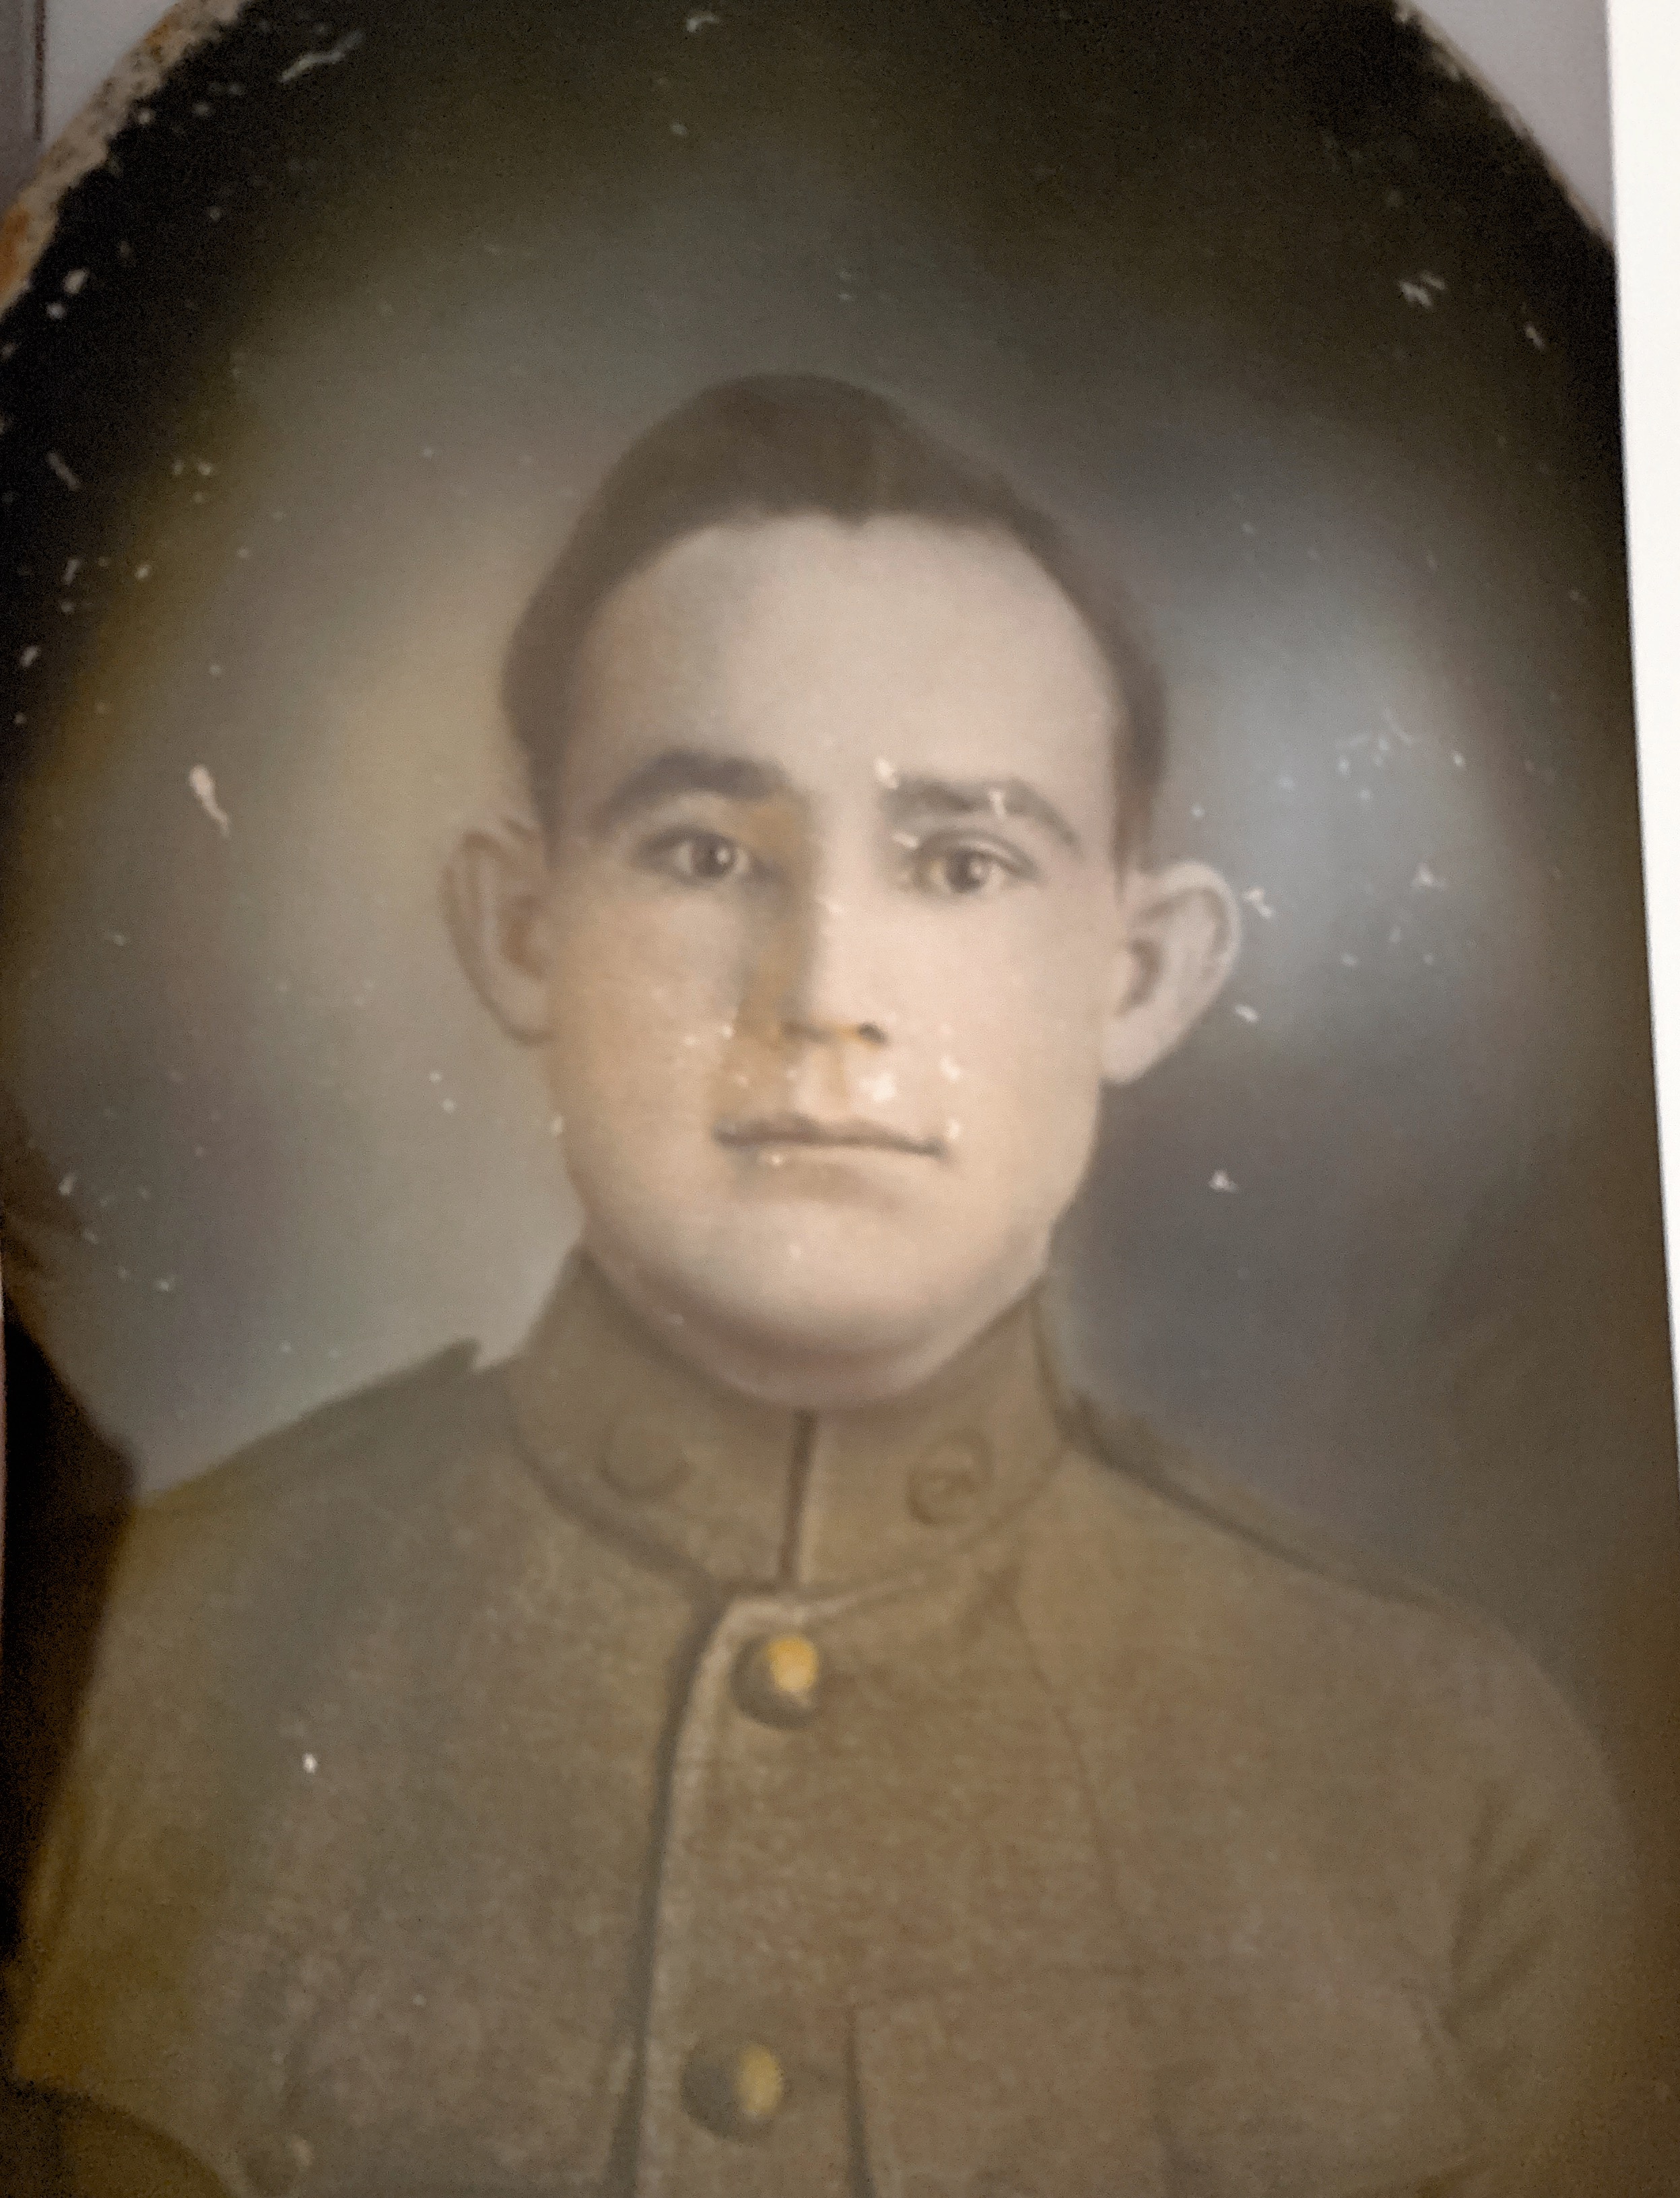 Grandfather Claud Cunningham, WWI Veteran
b: March 20, 1893 Millers Grove Texas
d: August 30, 1965 San Angelo Texas